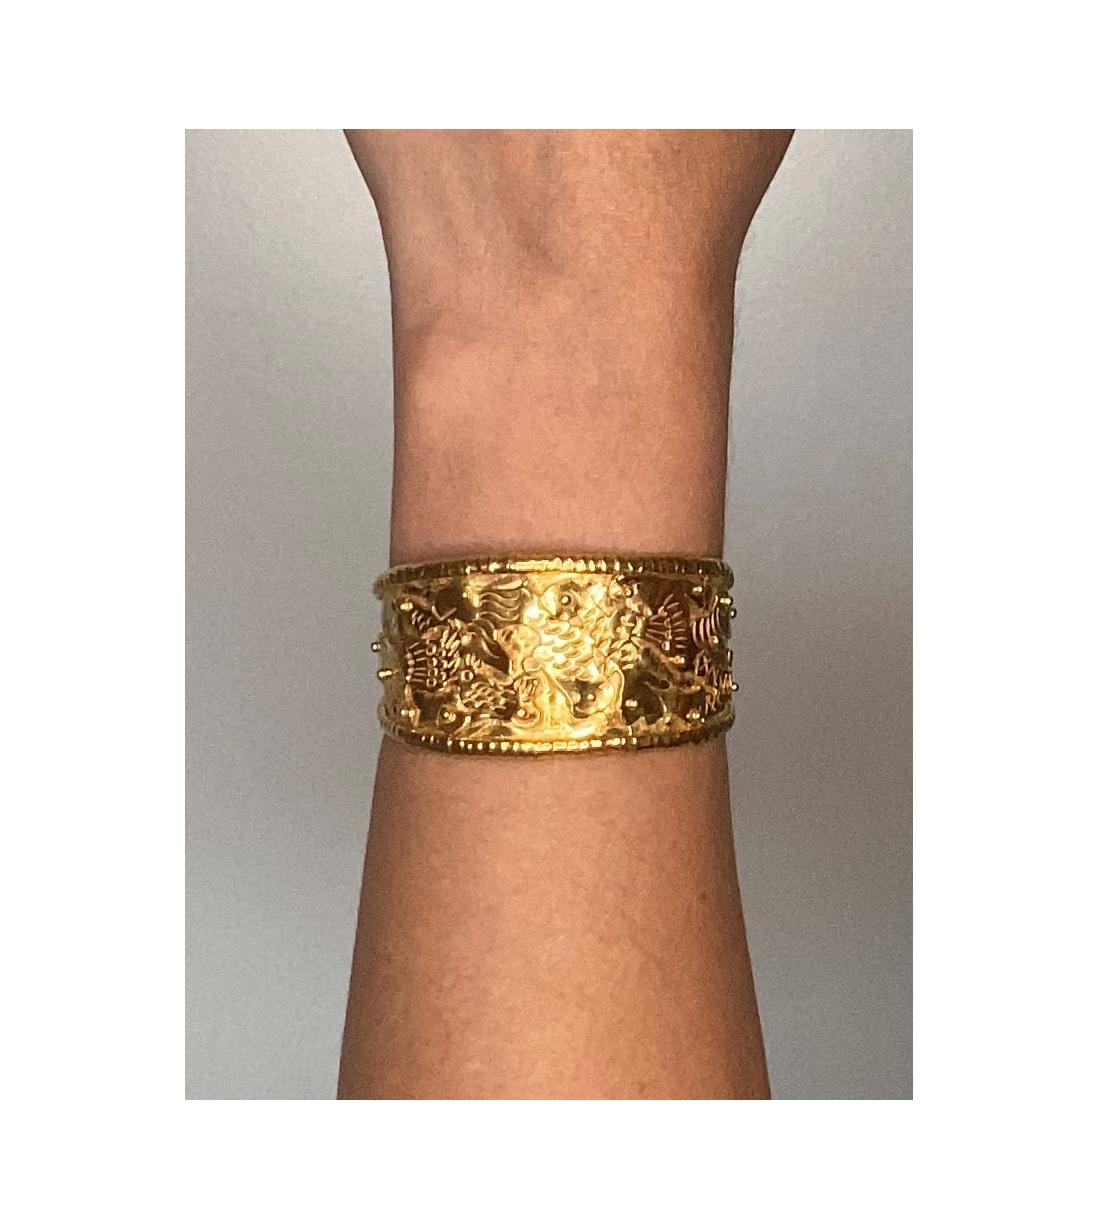 Figurative cuff bracelet designed by Jean Mahie.

A beautiful wearable art piece, created in Paris France by the artist and goldsmith Jean Mahie, back in the 1980. This rare vintage sculptural cuff bracelet is part of the Charmings Monster